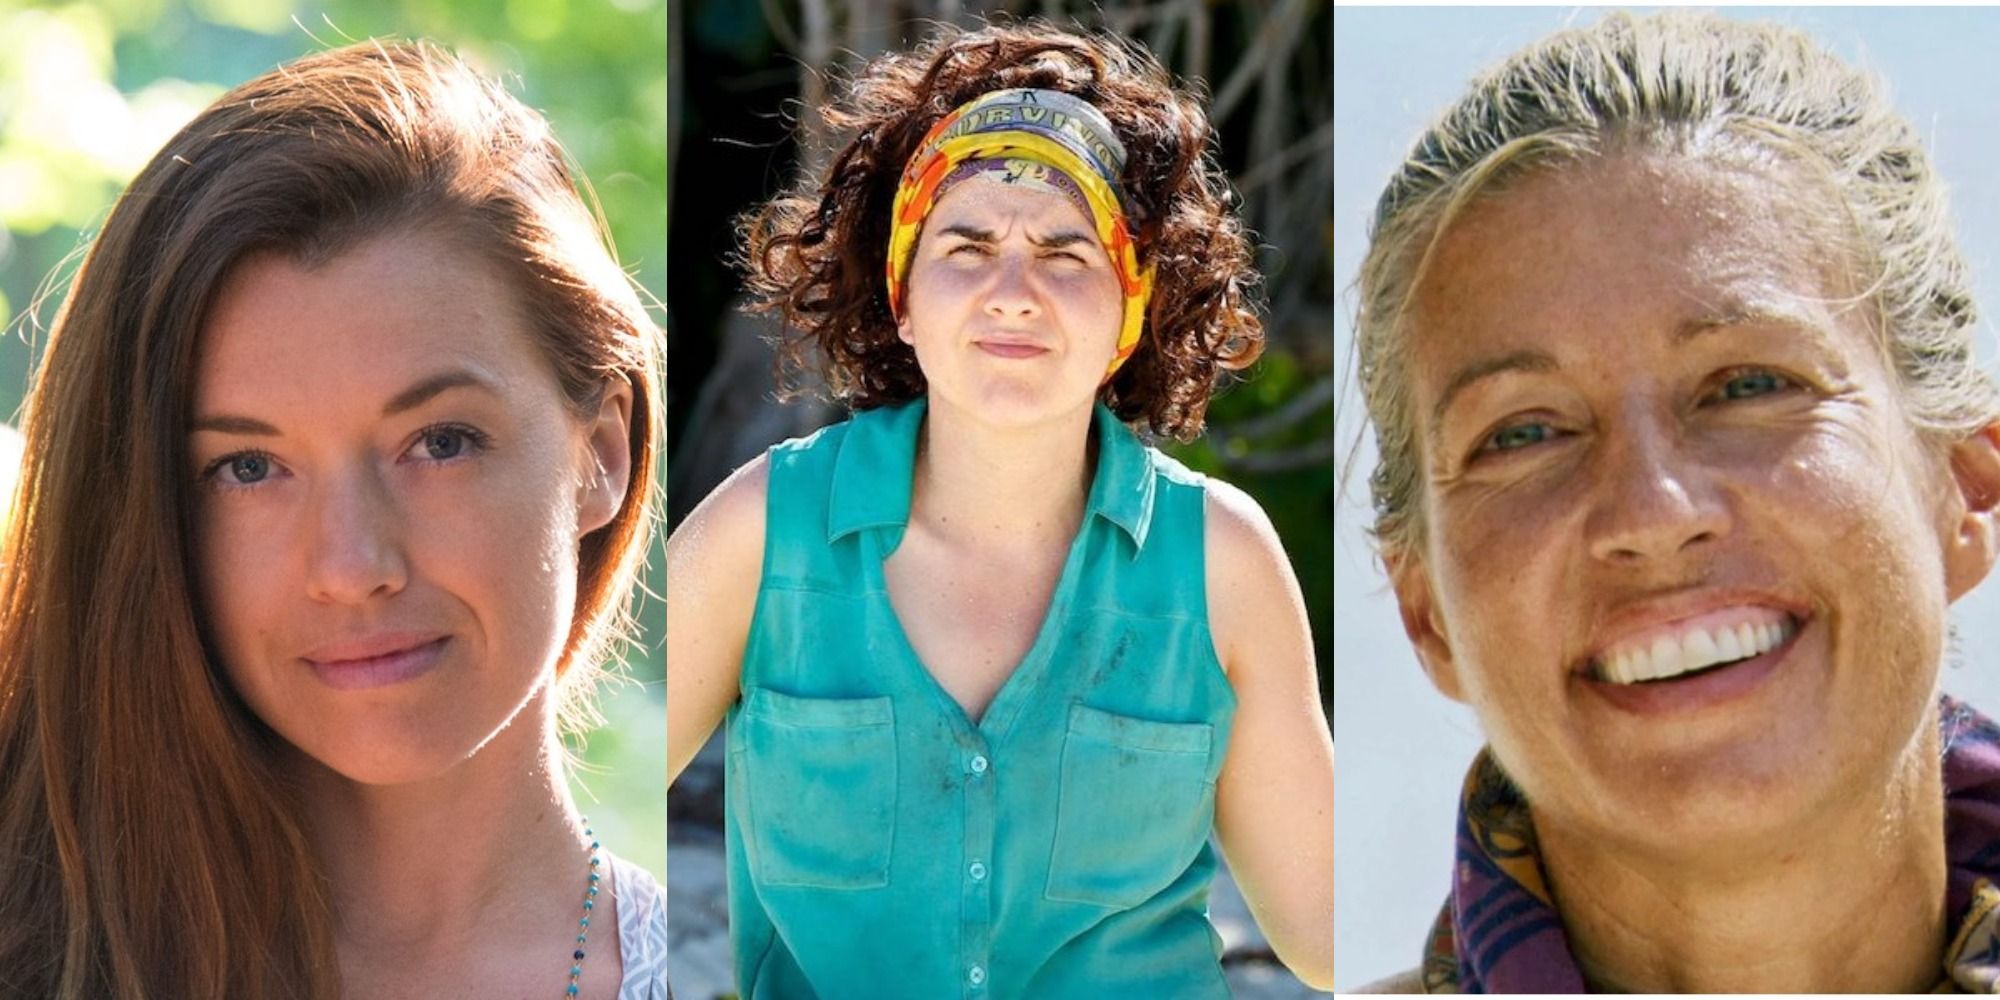 Split image of Parvati, Aubry, and Chrissy from Survivor